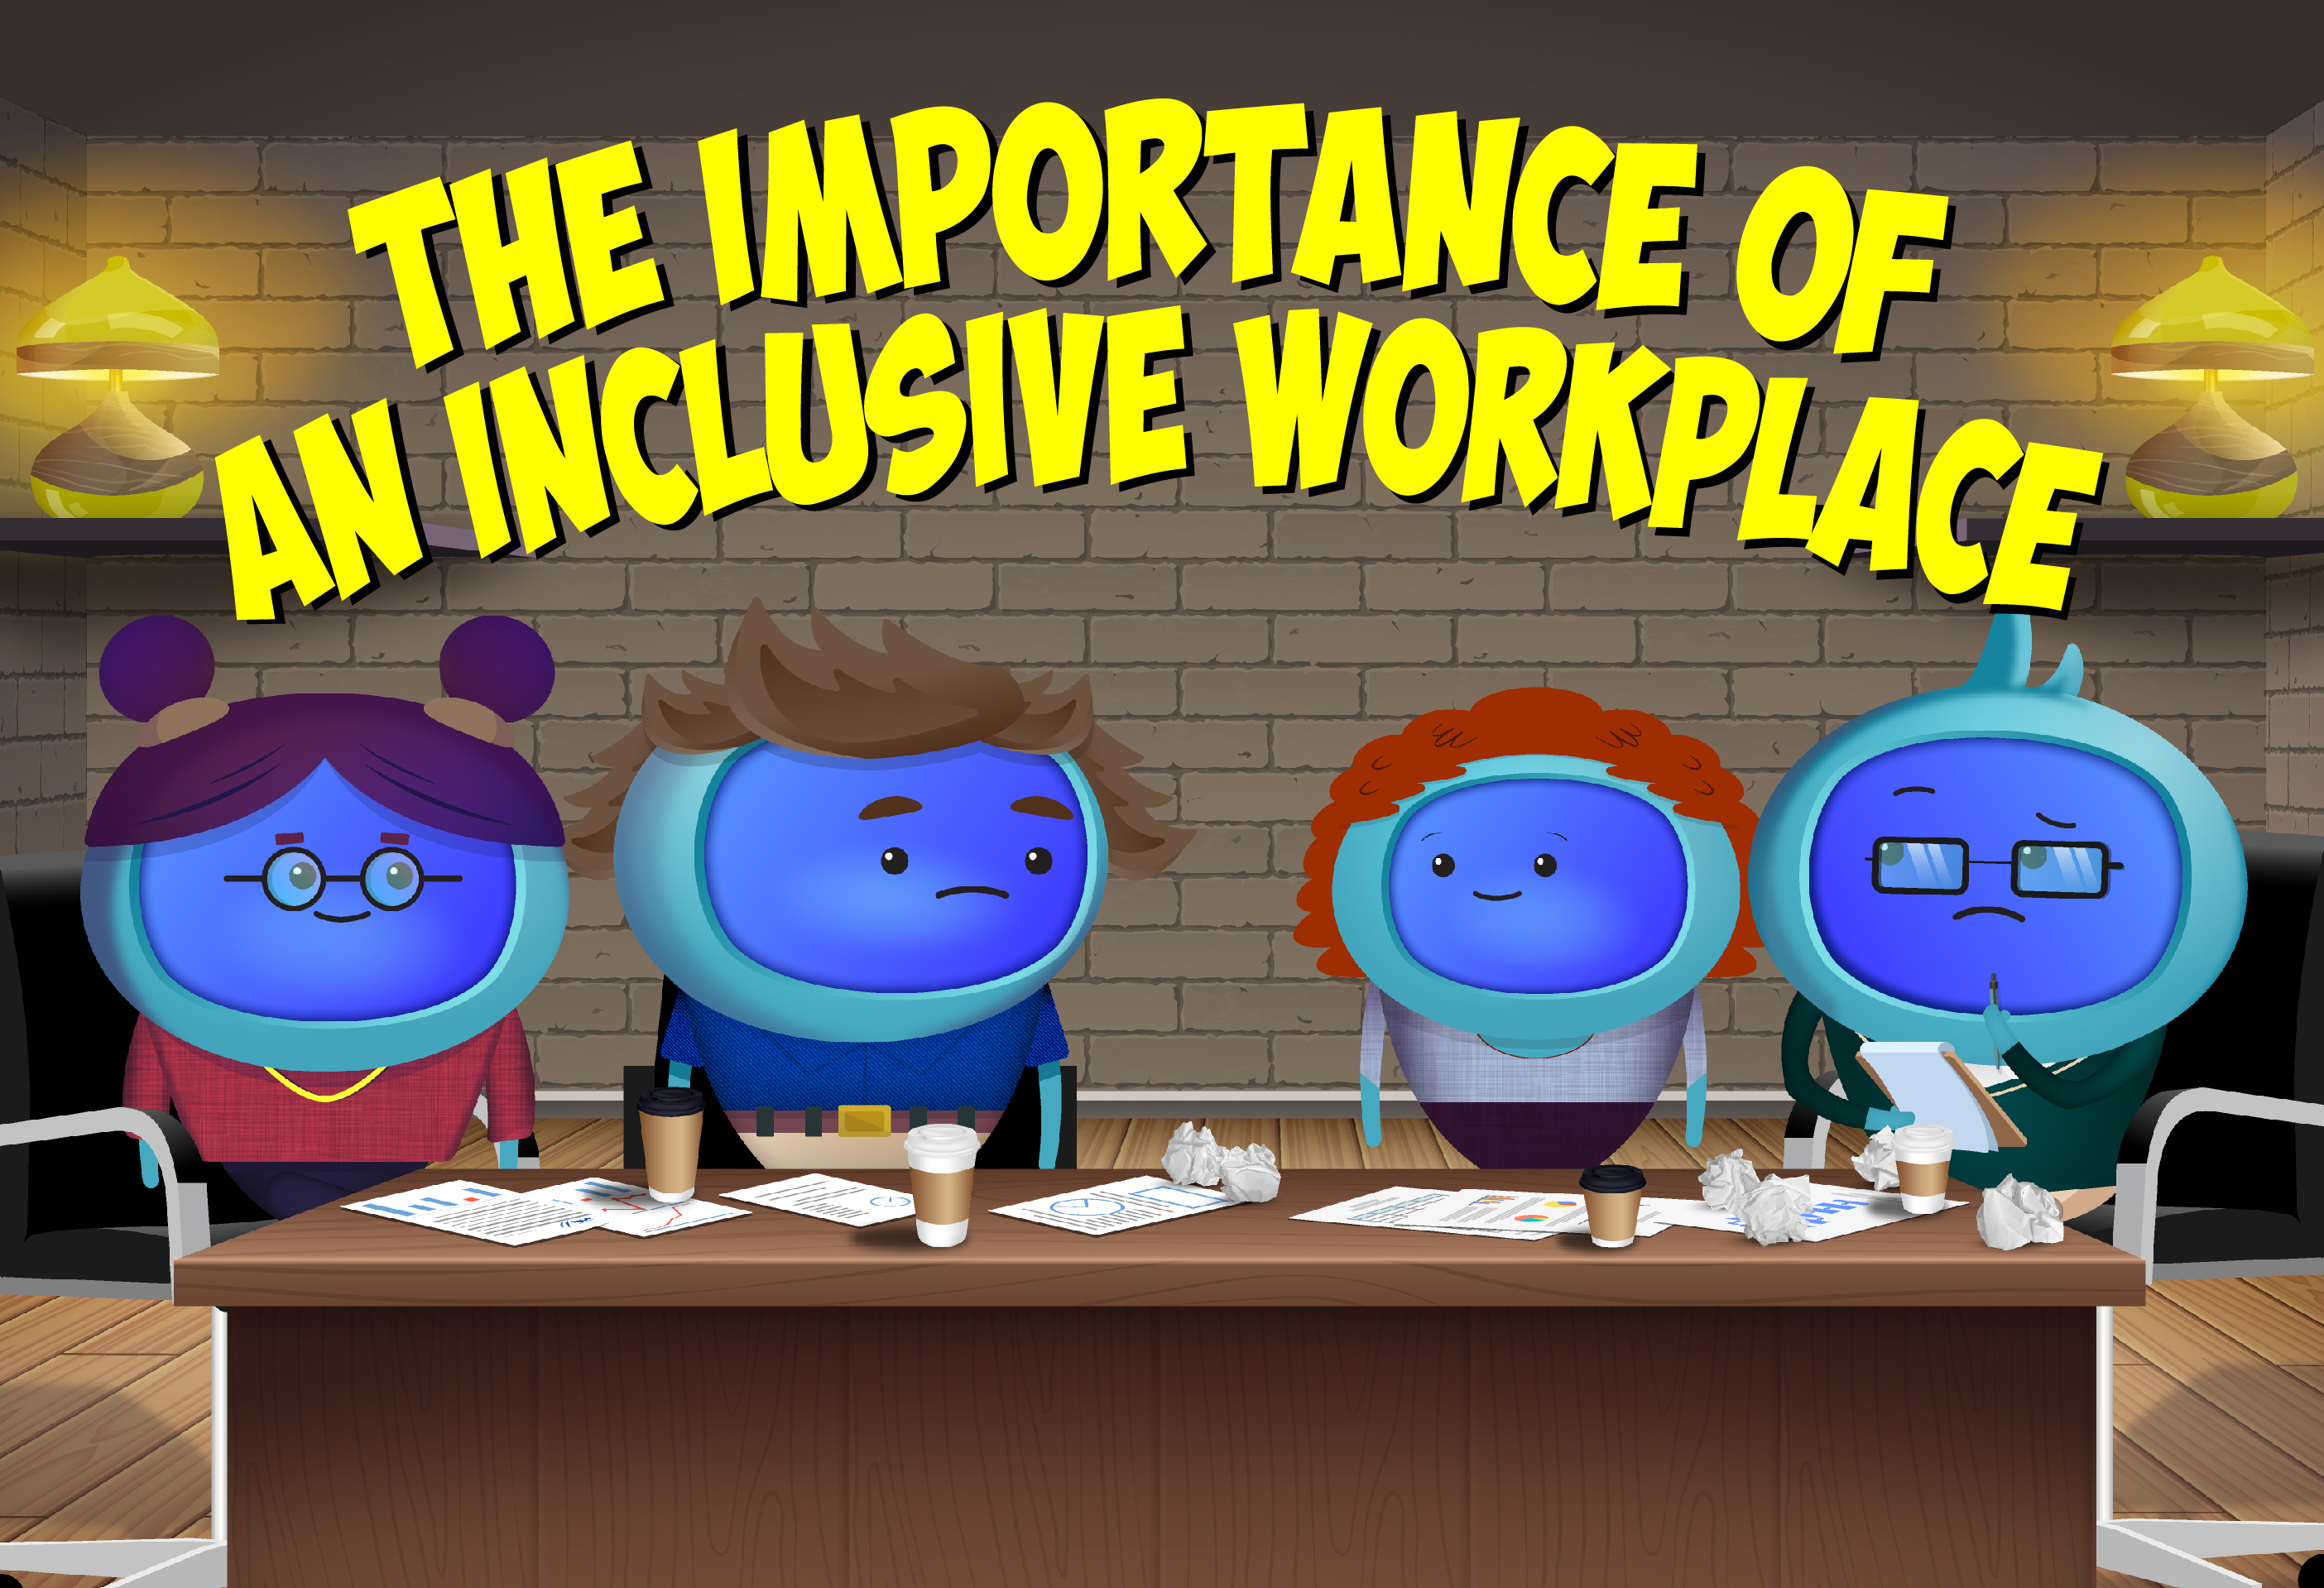 iAM 00327 - The Importance of an Inclusive Workplace - LMS Thumbnail-1